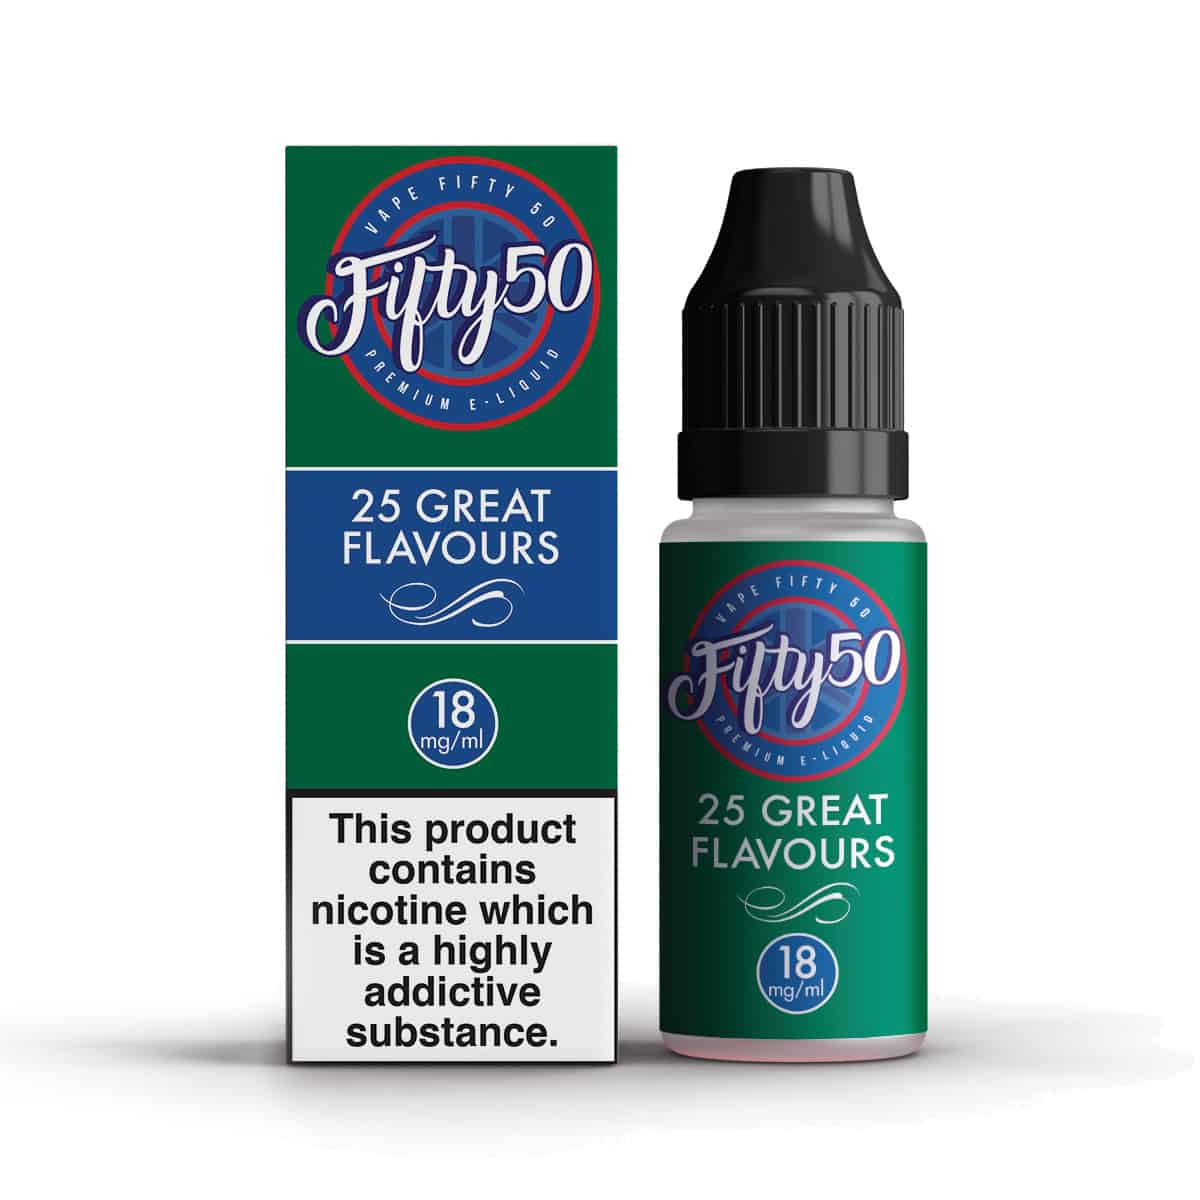 United kingdom UK First Eliquid Subscription Service Vape Made Simple offering Disposables, Freebase, Nic salts -  with a wide variety of disposables Lost Mary Crystal Bar Elf Disposables - 50 Fifty Pink Crystal 18mg